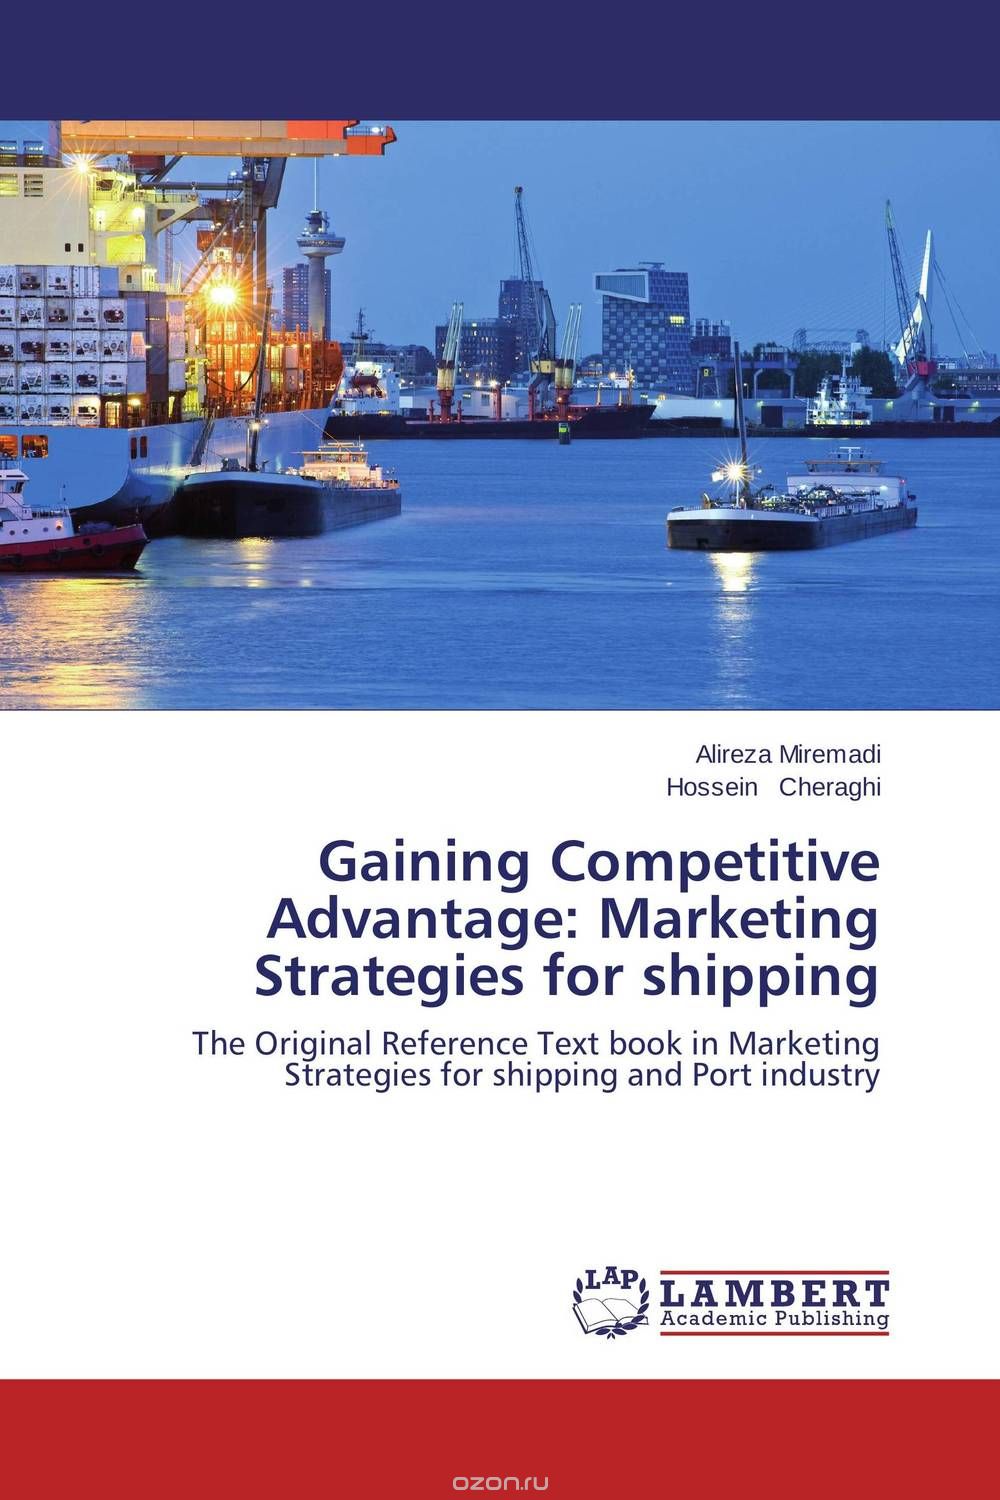 Gaining Competitive Advantage: Marketing Strategies for shipping